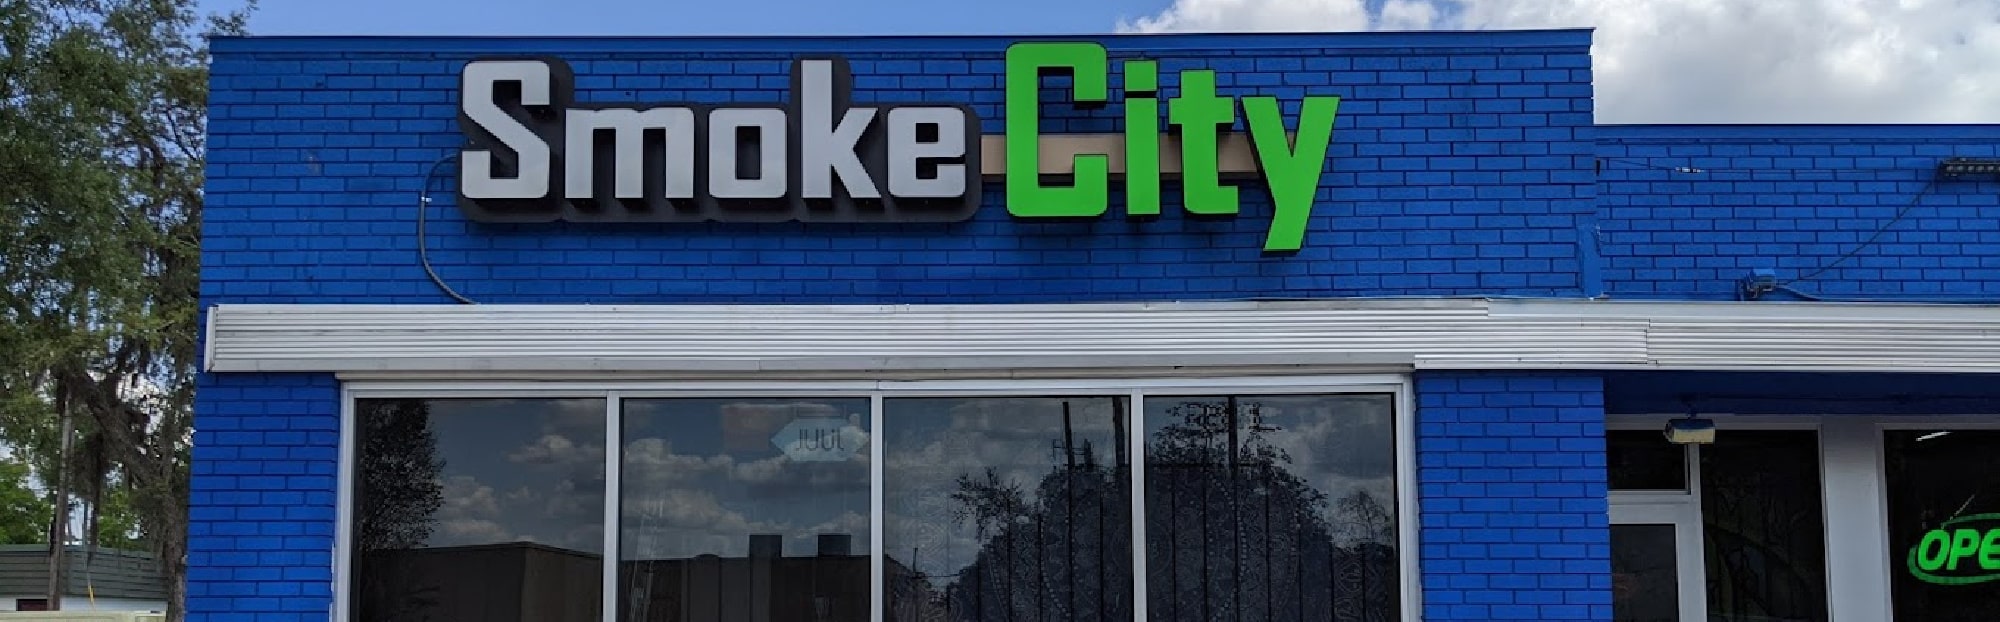 image of smoke city in gainesville fl